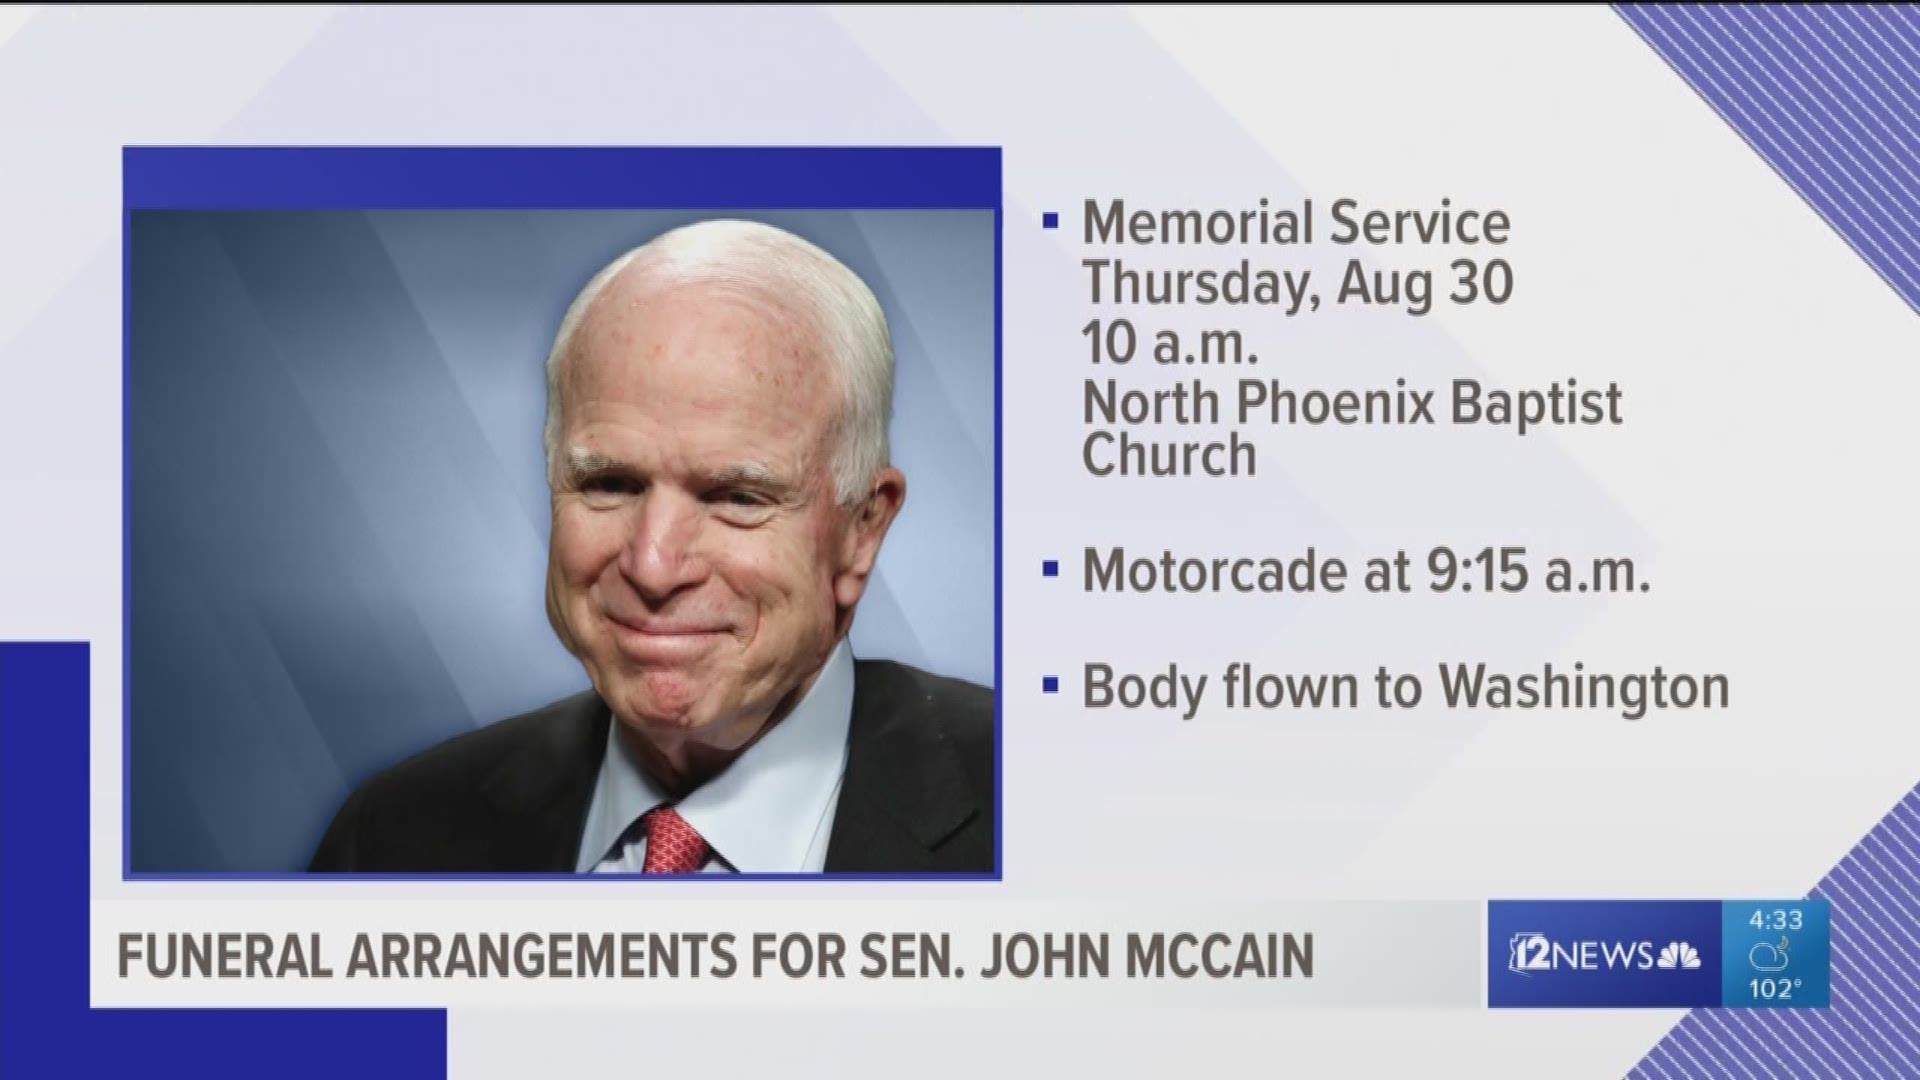 We're learning about the services for Sen. John McCain and the people who will be attending.